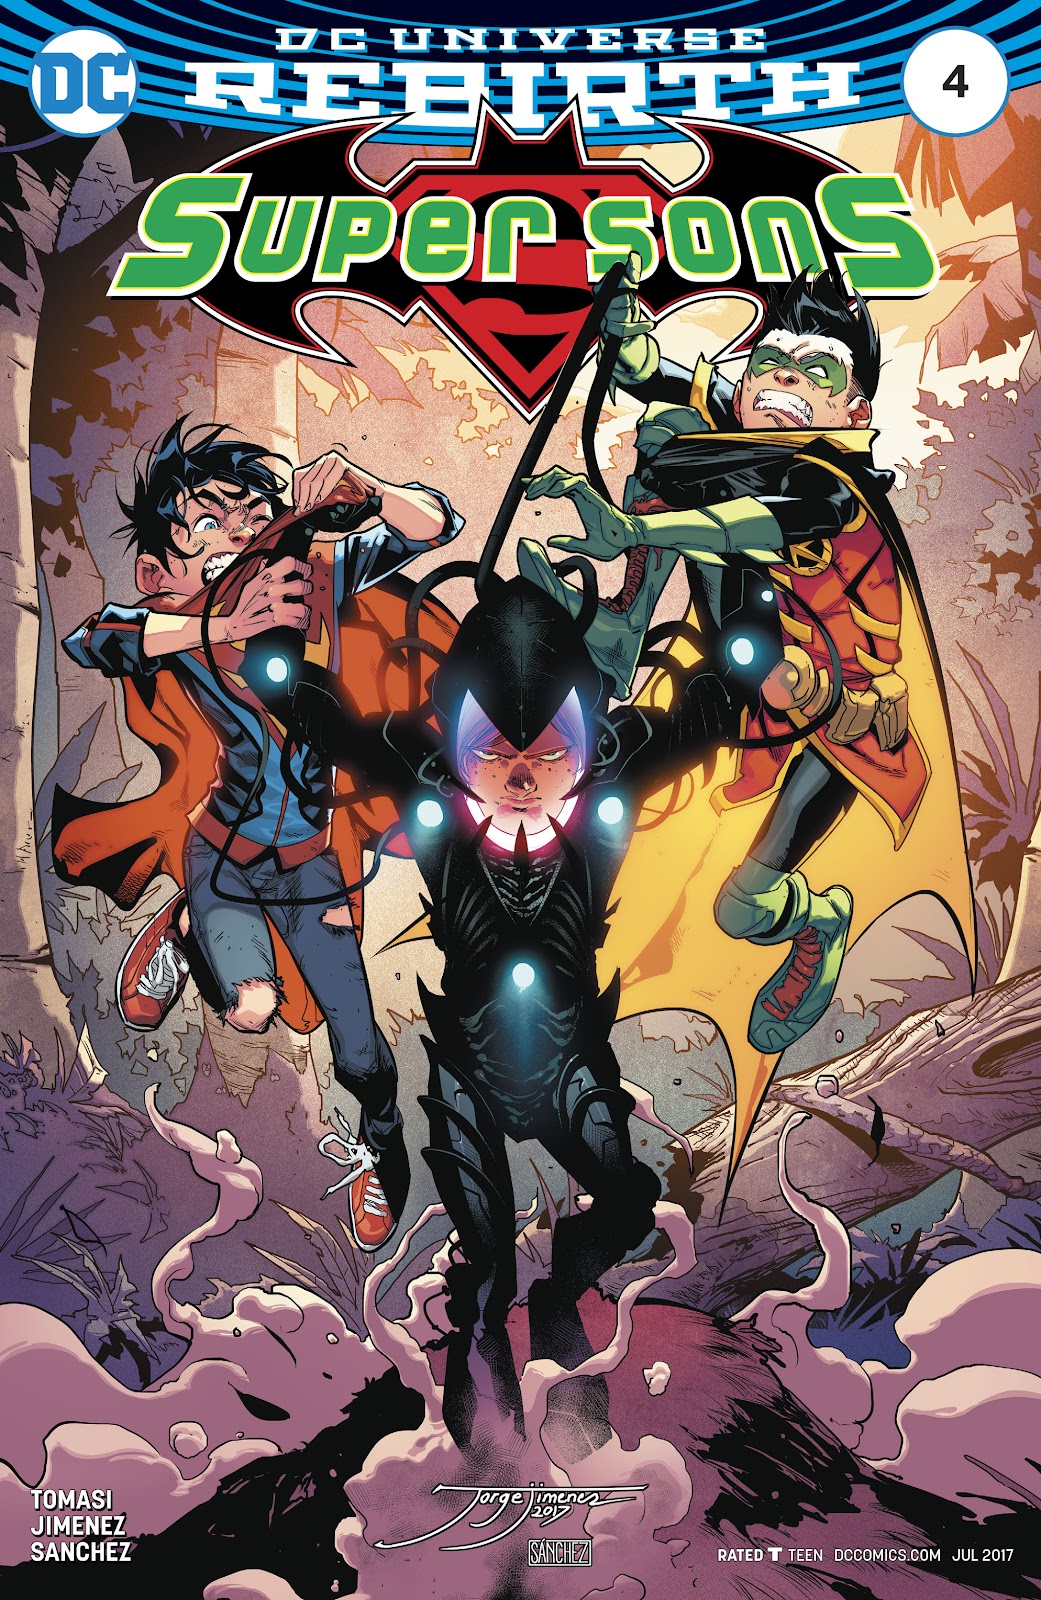 Batman Shemale Porn Comics - Super Sons Issue 4 | Read Super Sons Issue 4 comic online in high quality.  Read Full Comic online for free - Read comics online in high quality .